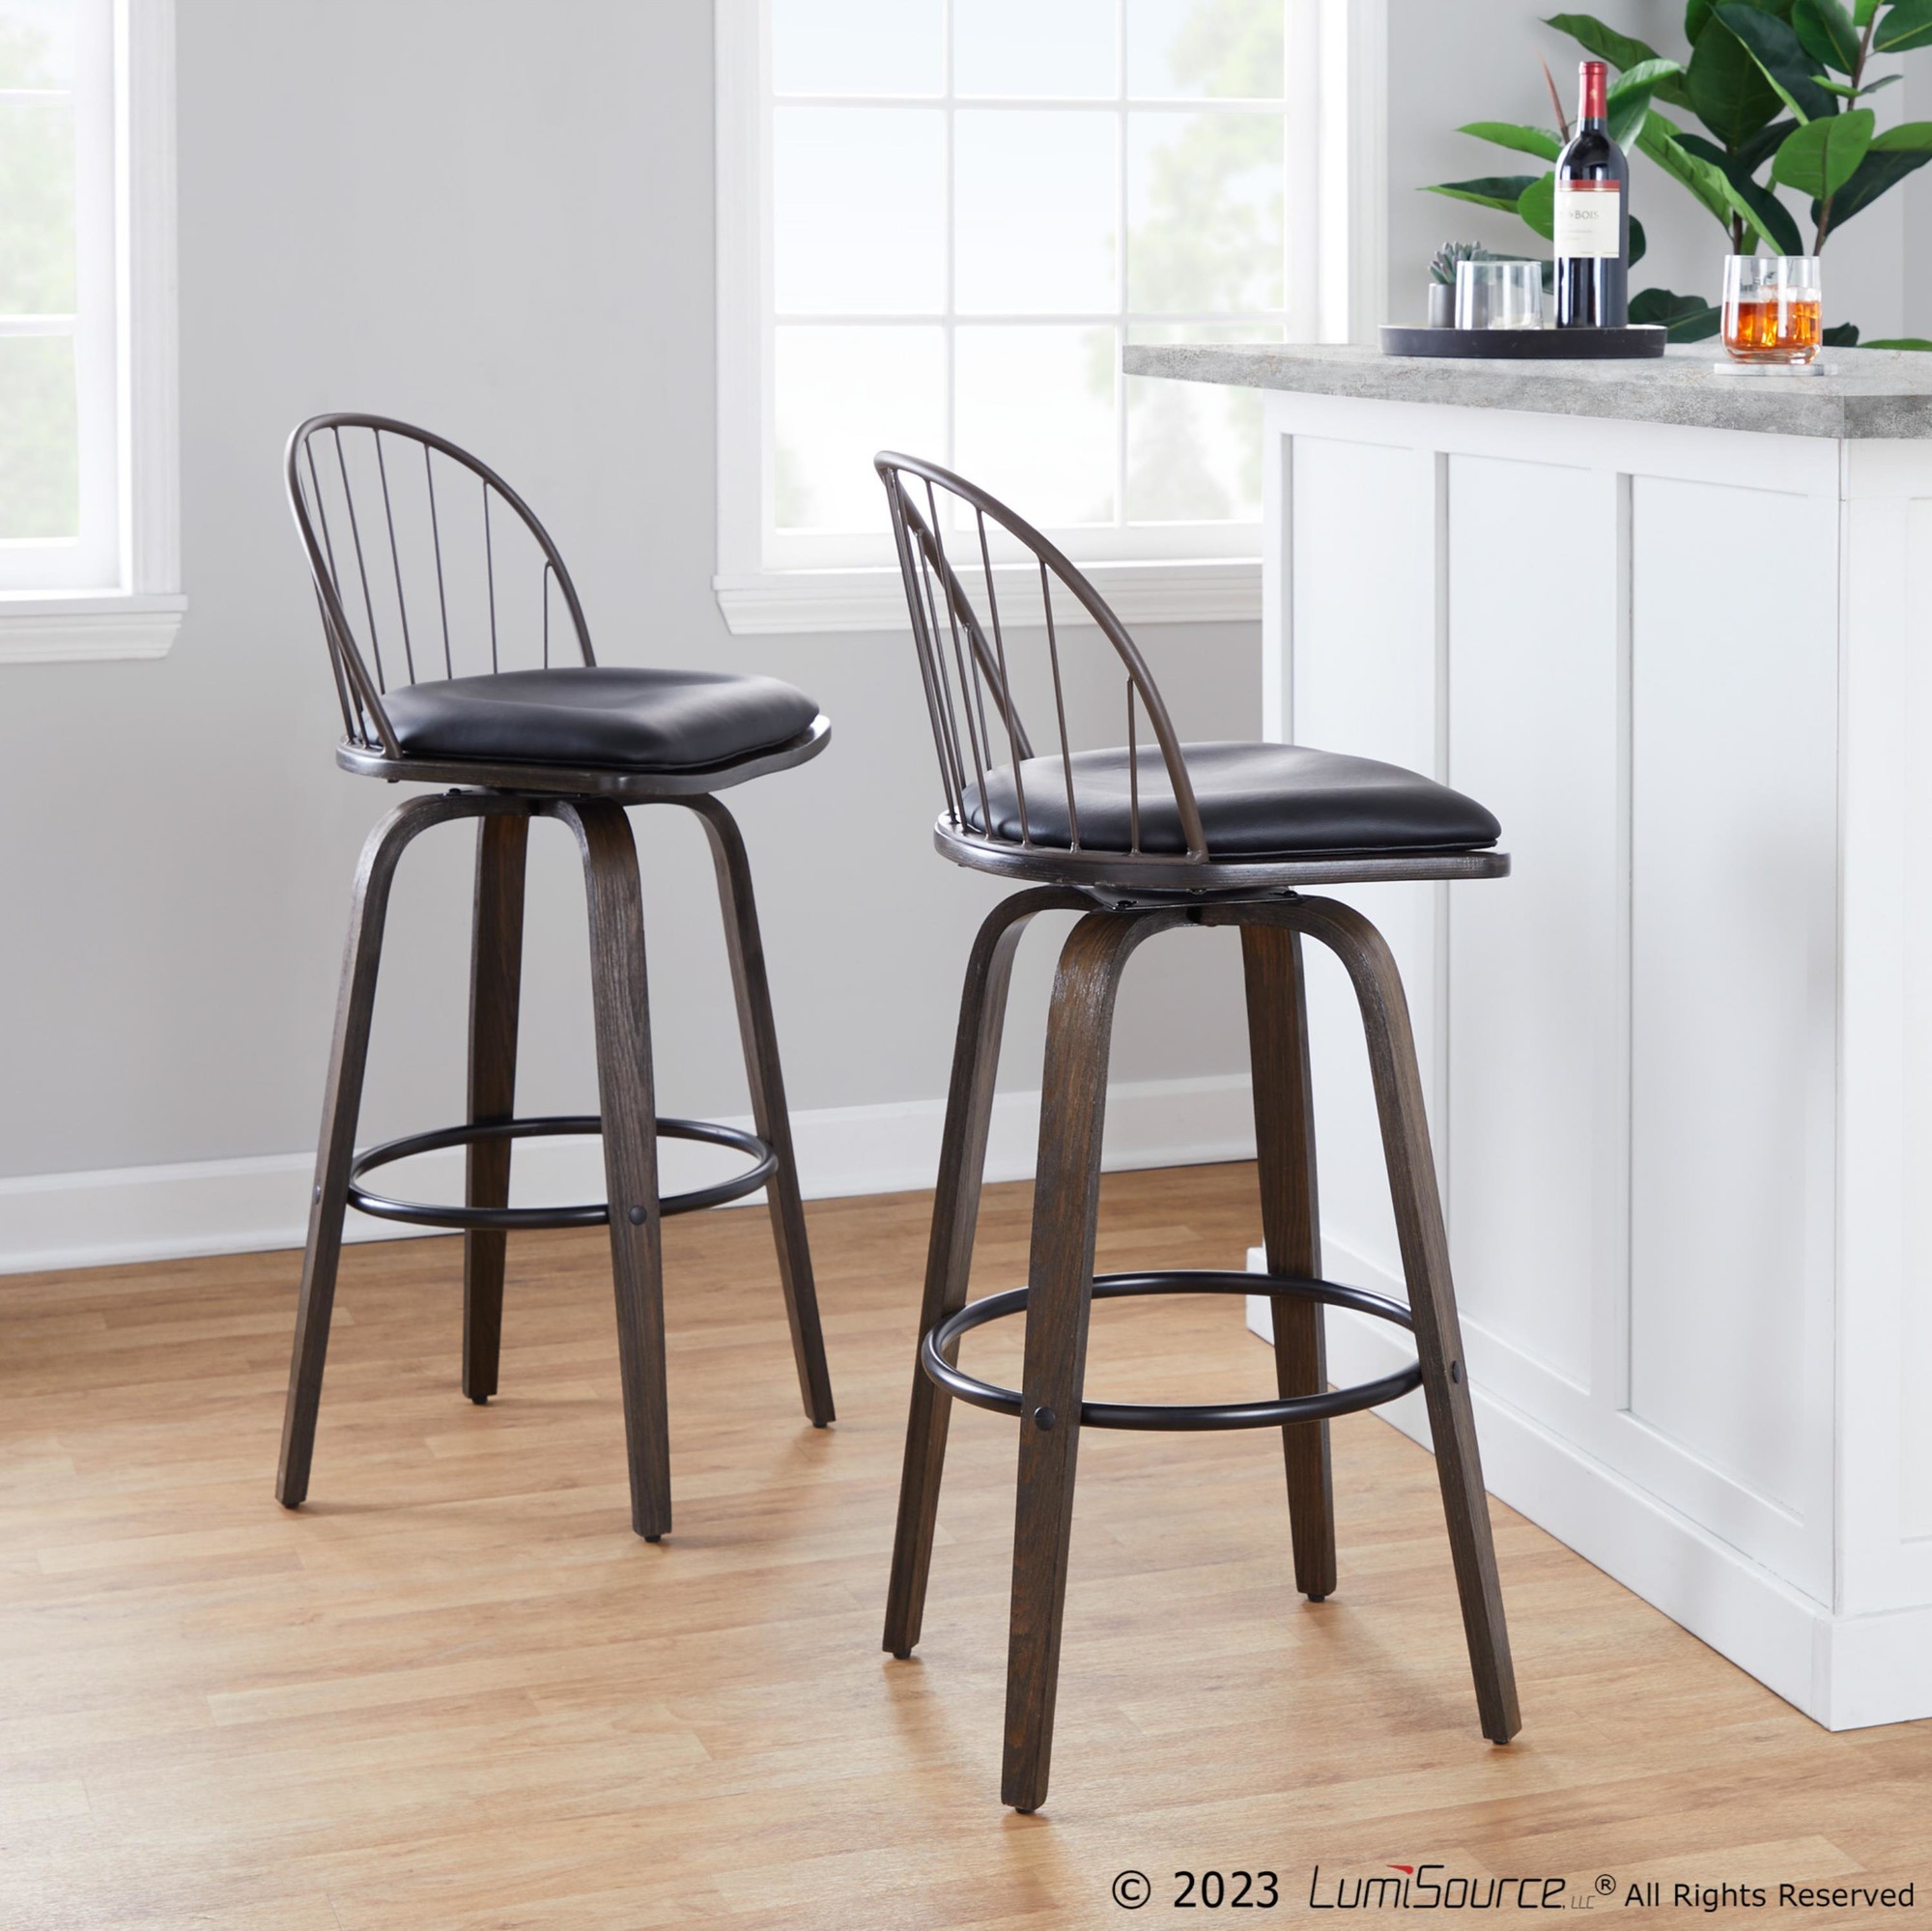 Riley 30" Fixed-height Barstool - Set Of 2